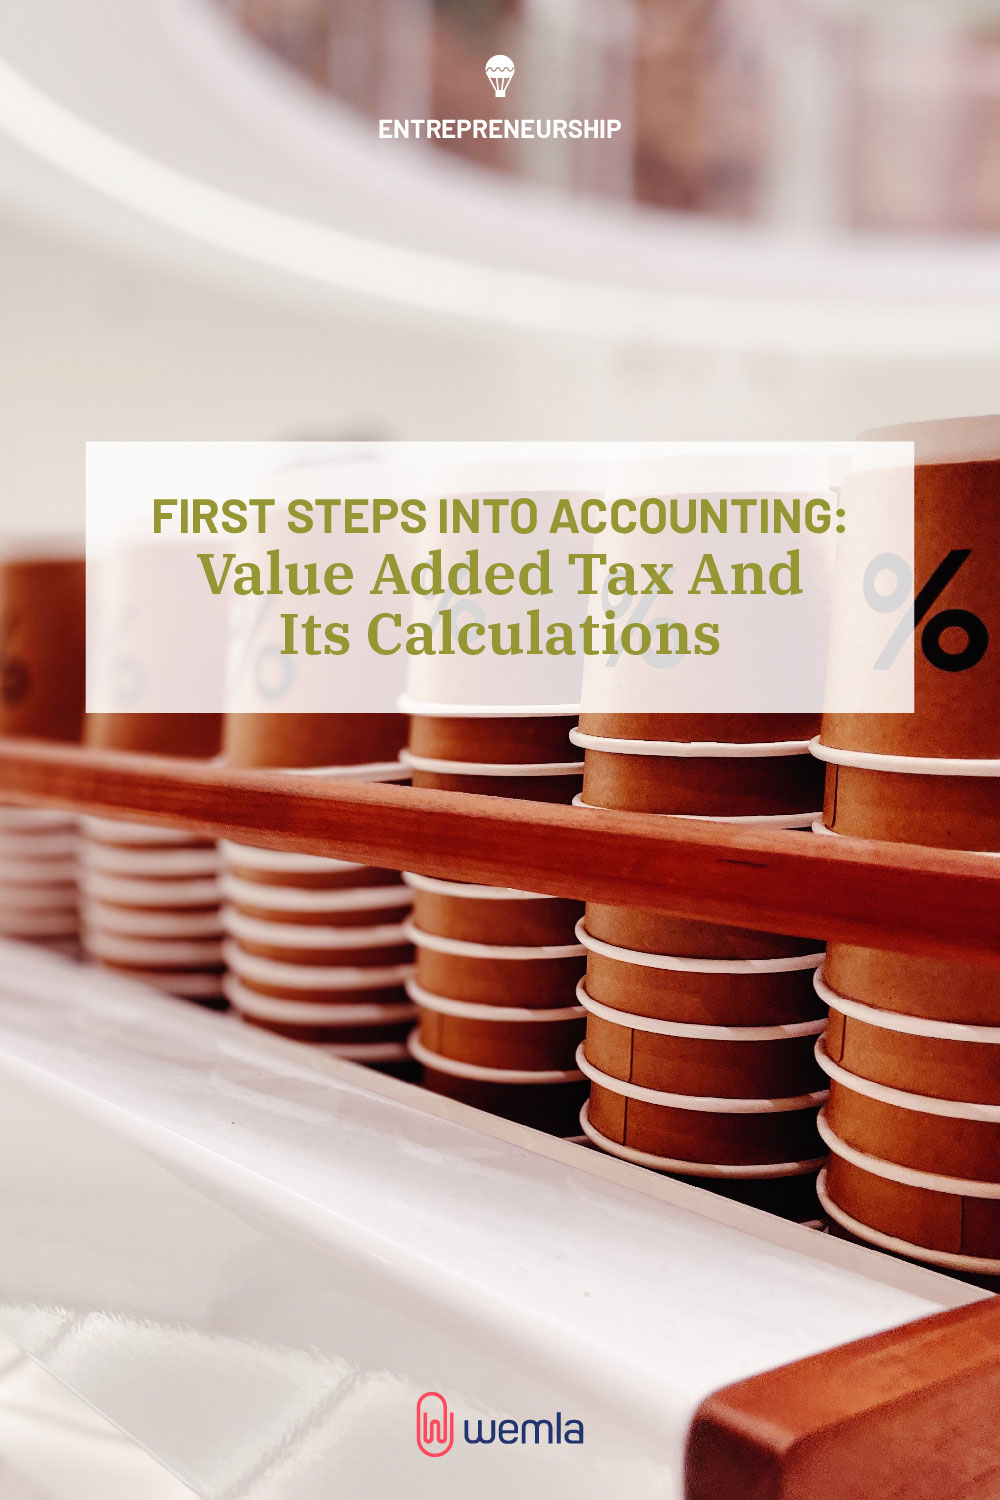 First Steps Into Accounting: Value Added Tax And Its Calculations